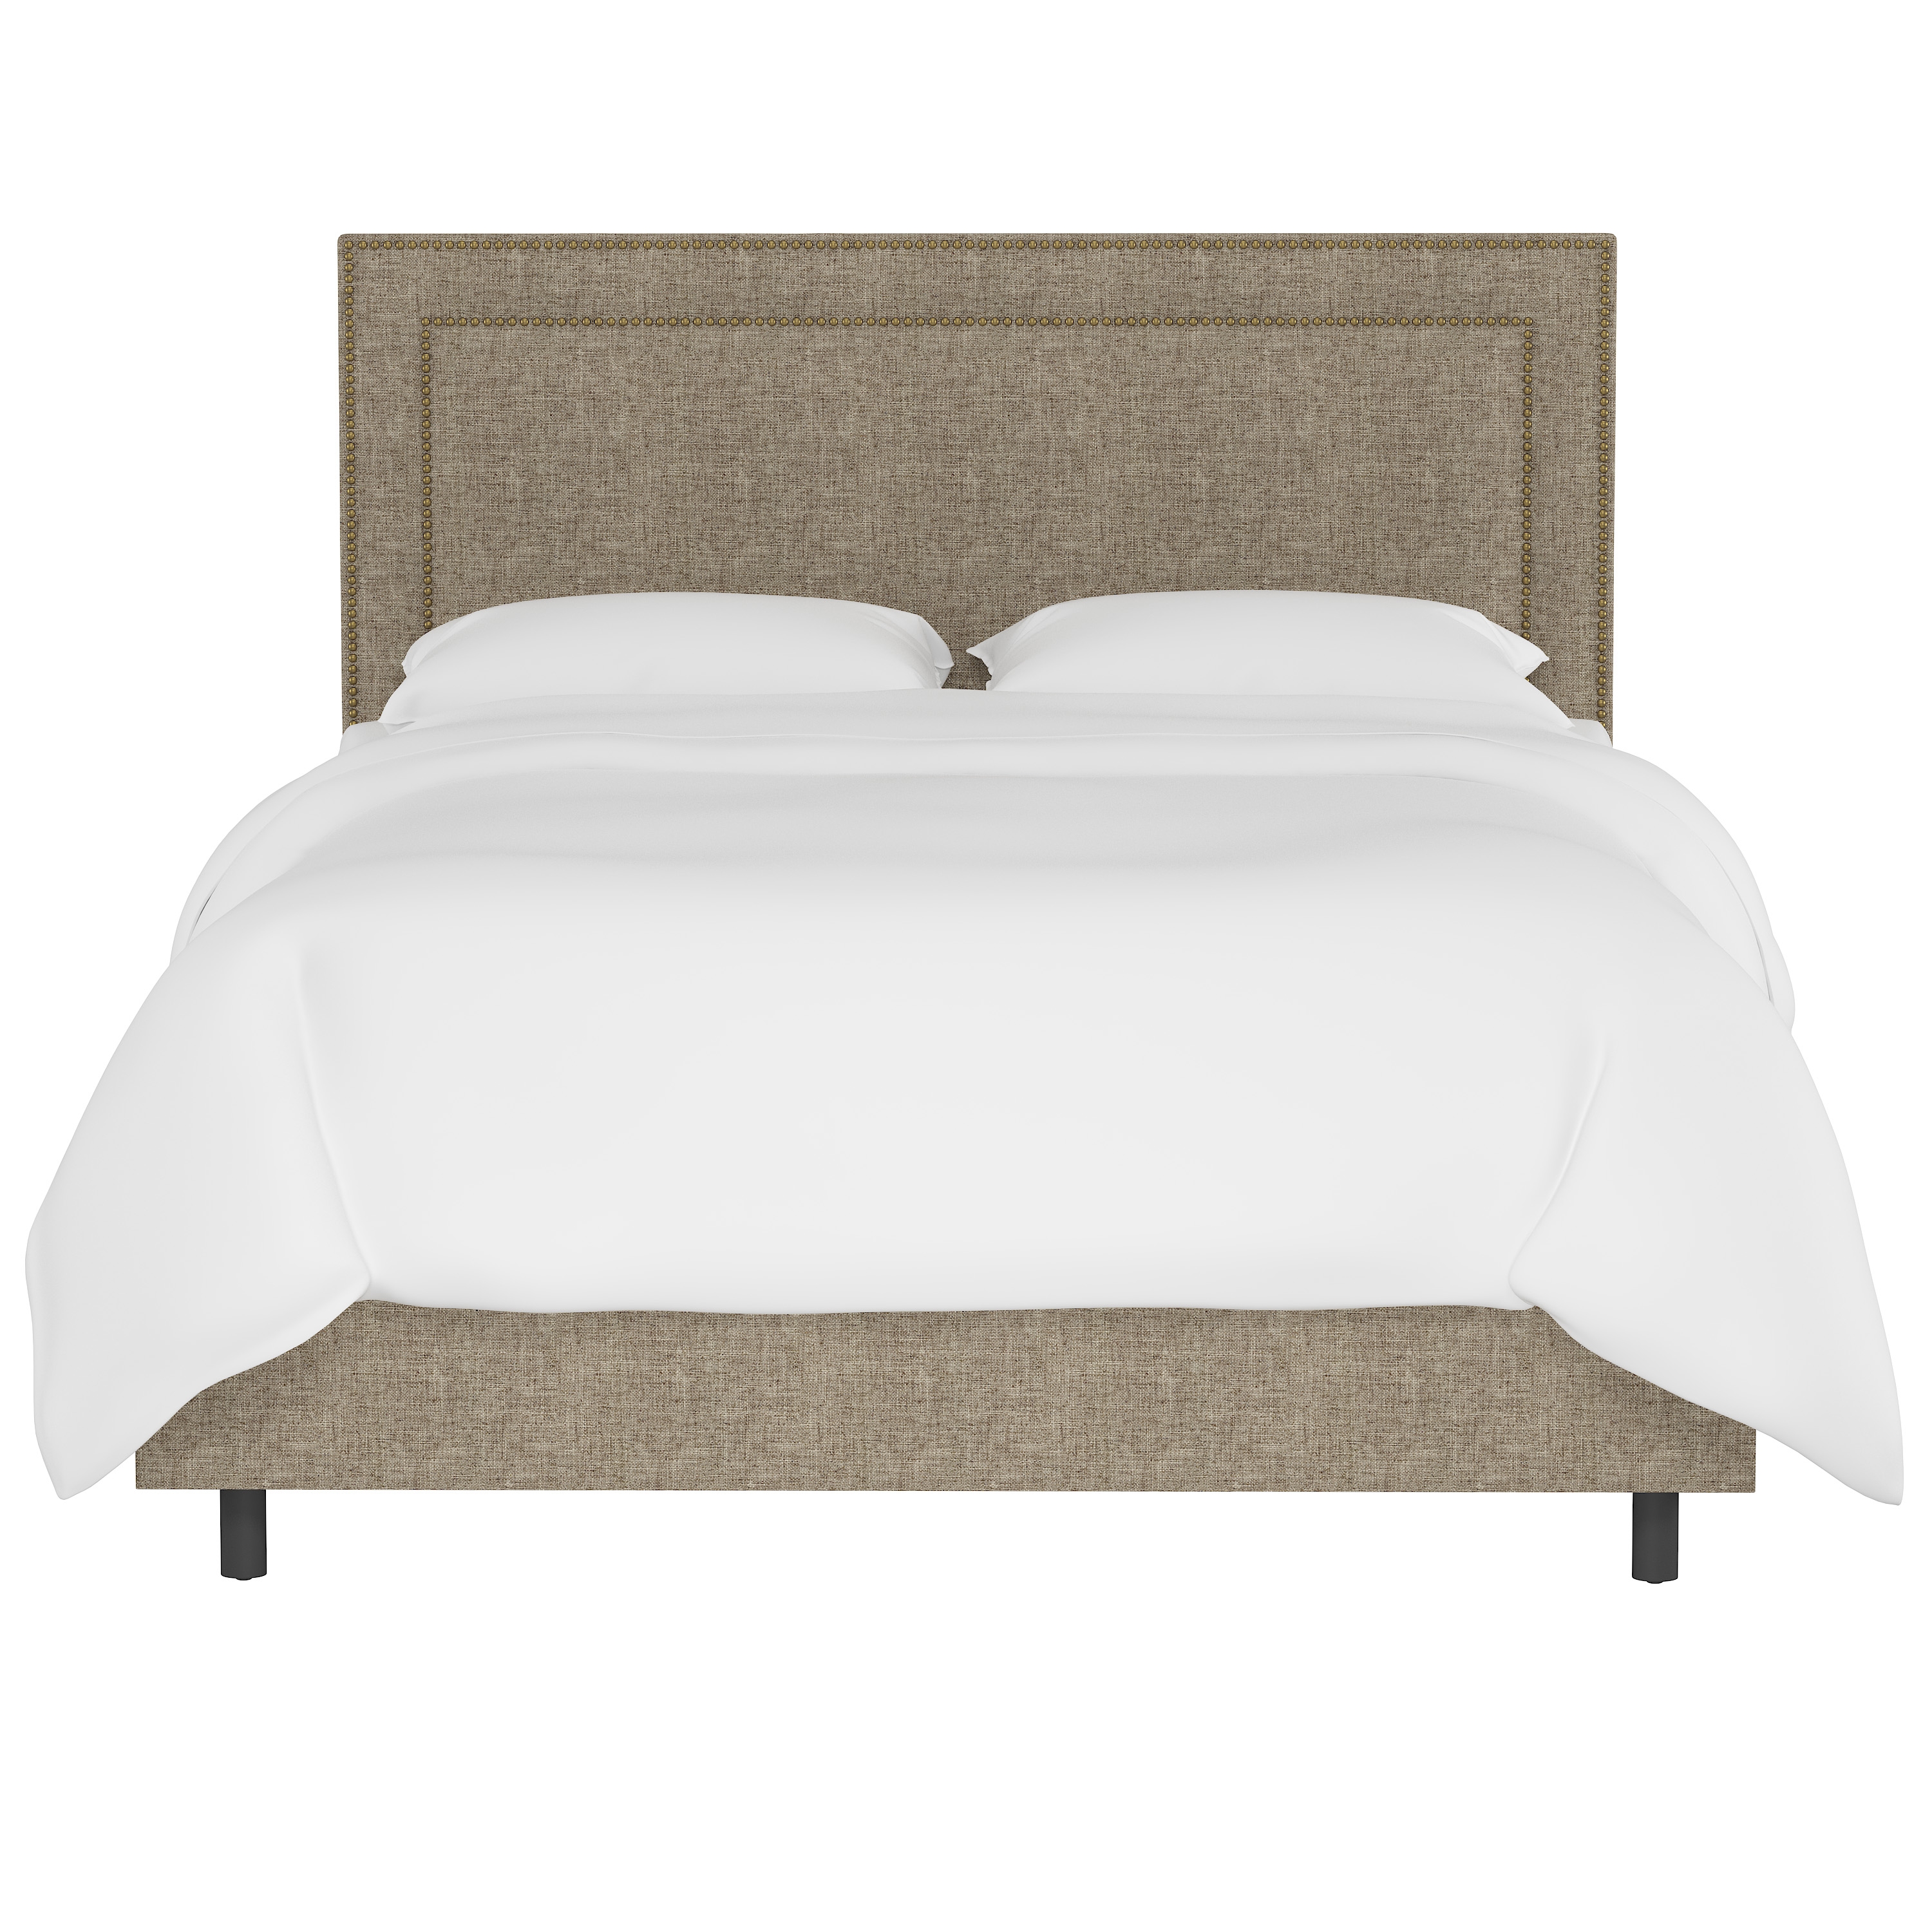 Williams Bed, Twin, Linen, Brass Nailheads - Image 1